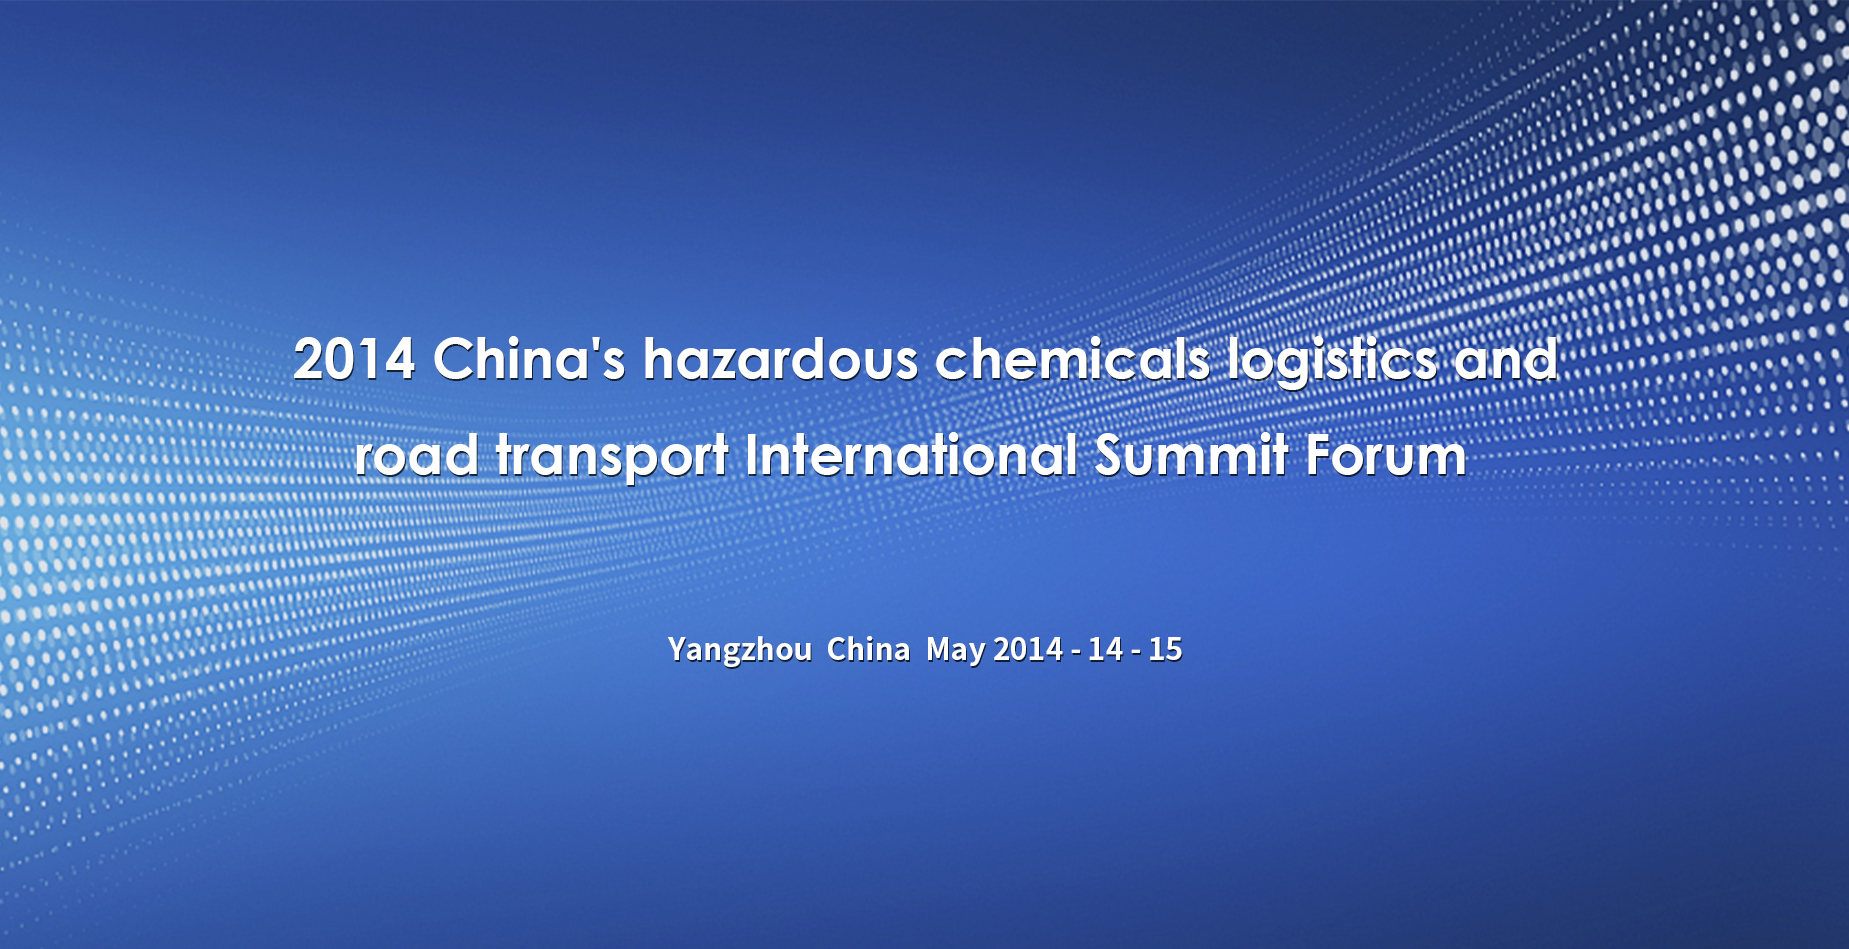 2014 the first International Summit Forum on hazardous chemicals logistics and road transport in Chi